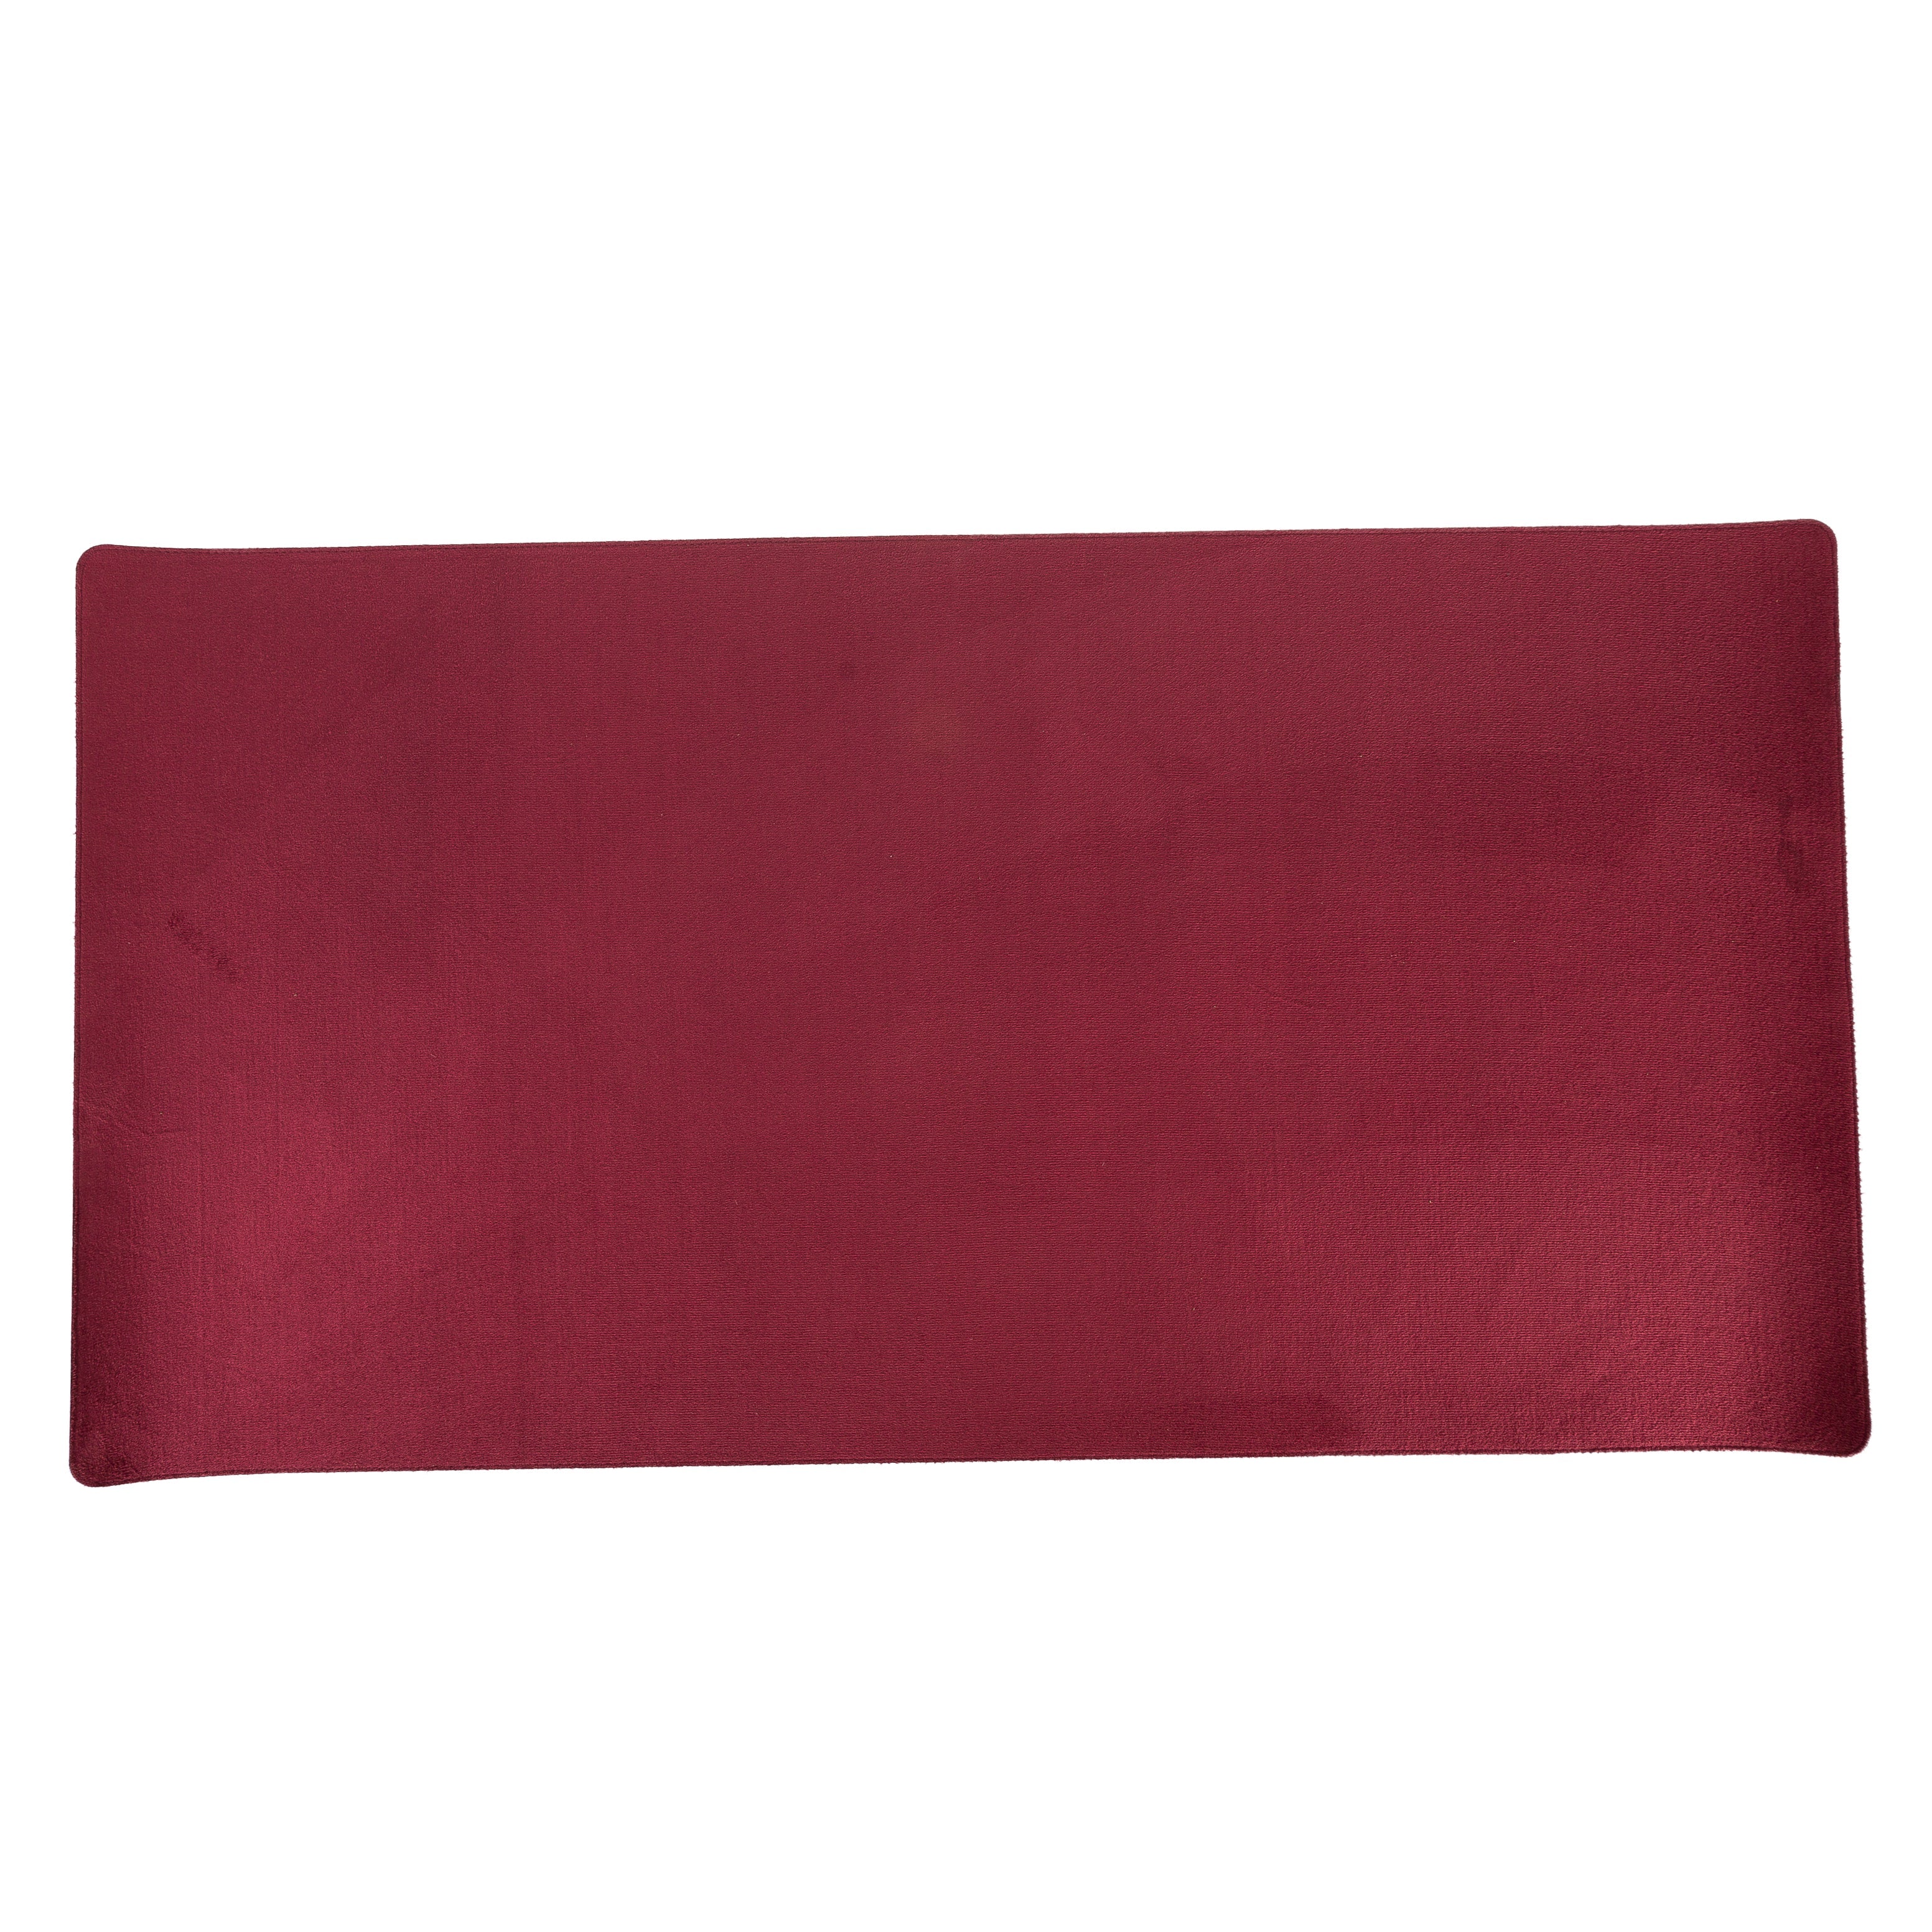 LupinnyLeather Genuine Cherry Leather Deskmat, Computer Pad, Office Desk Pad 5